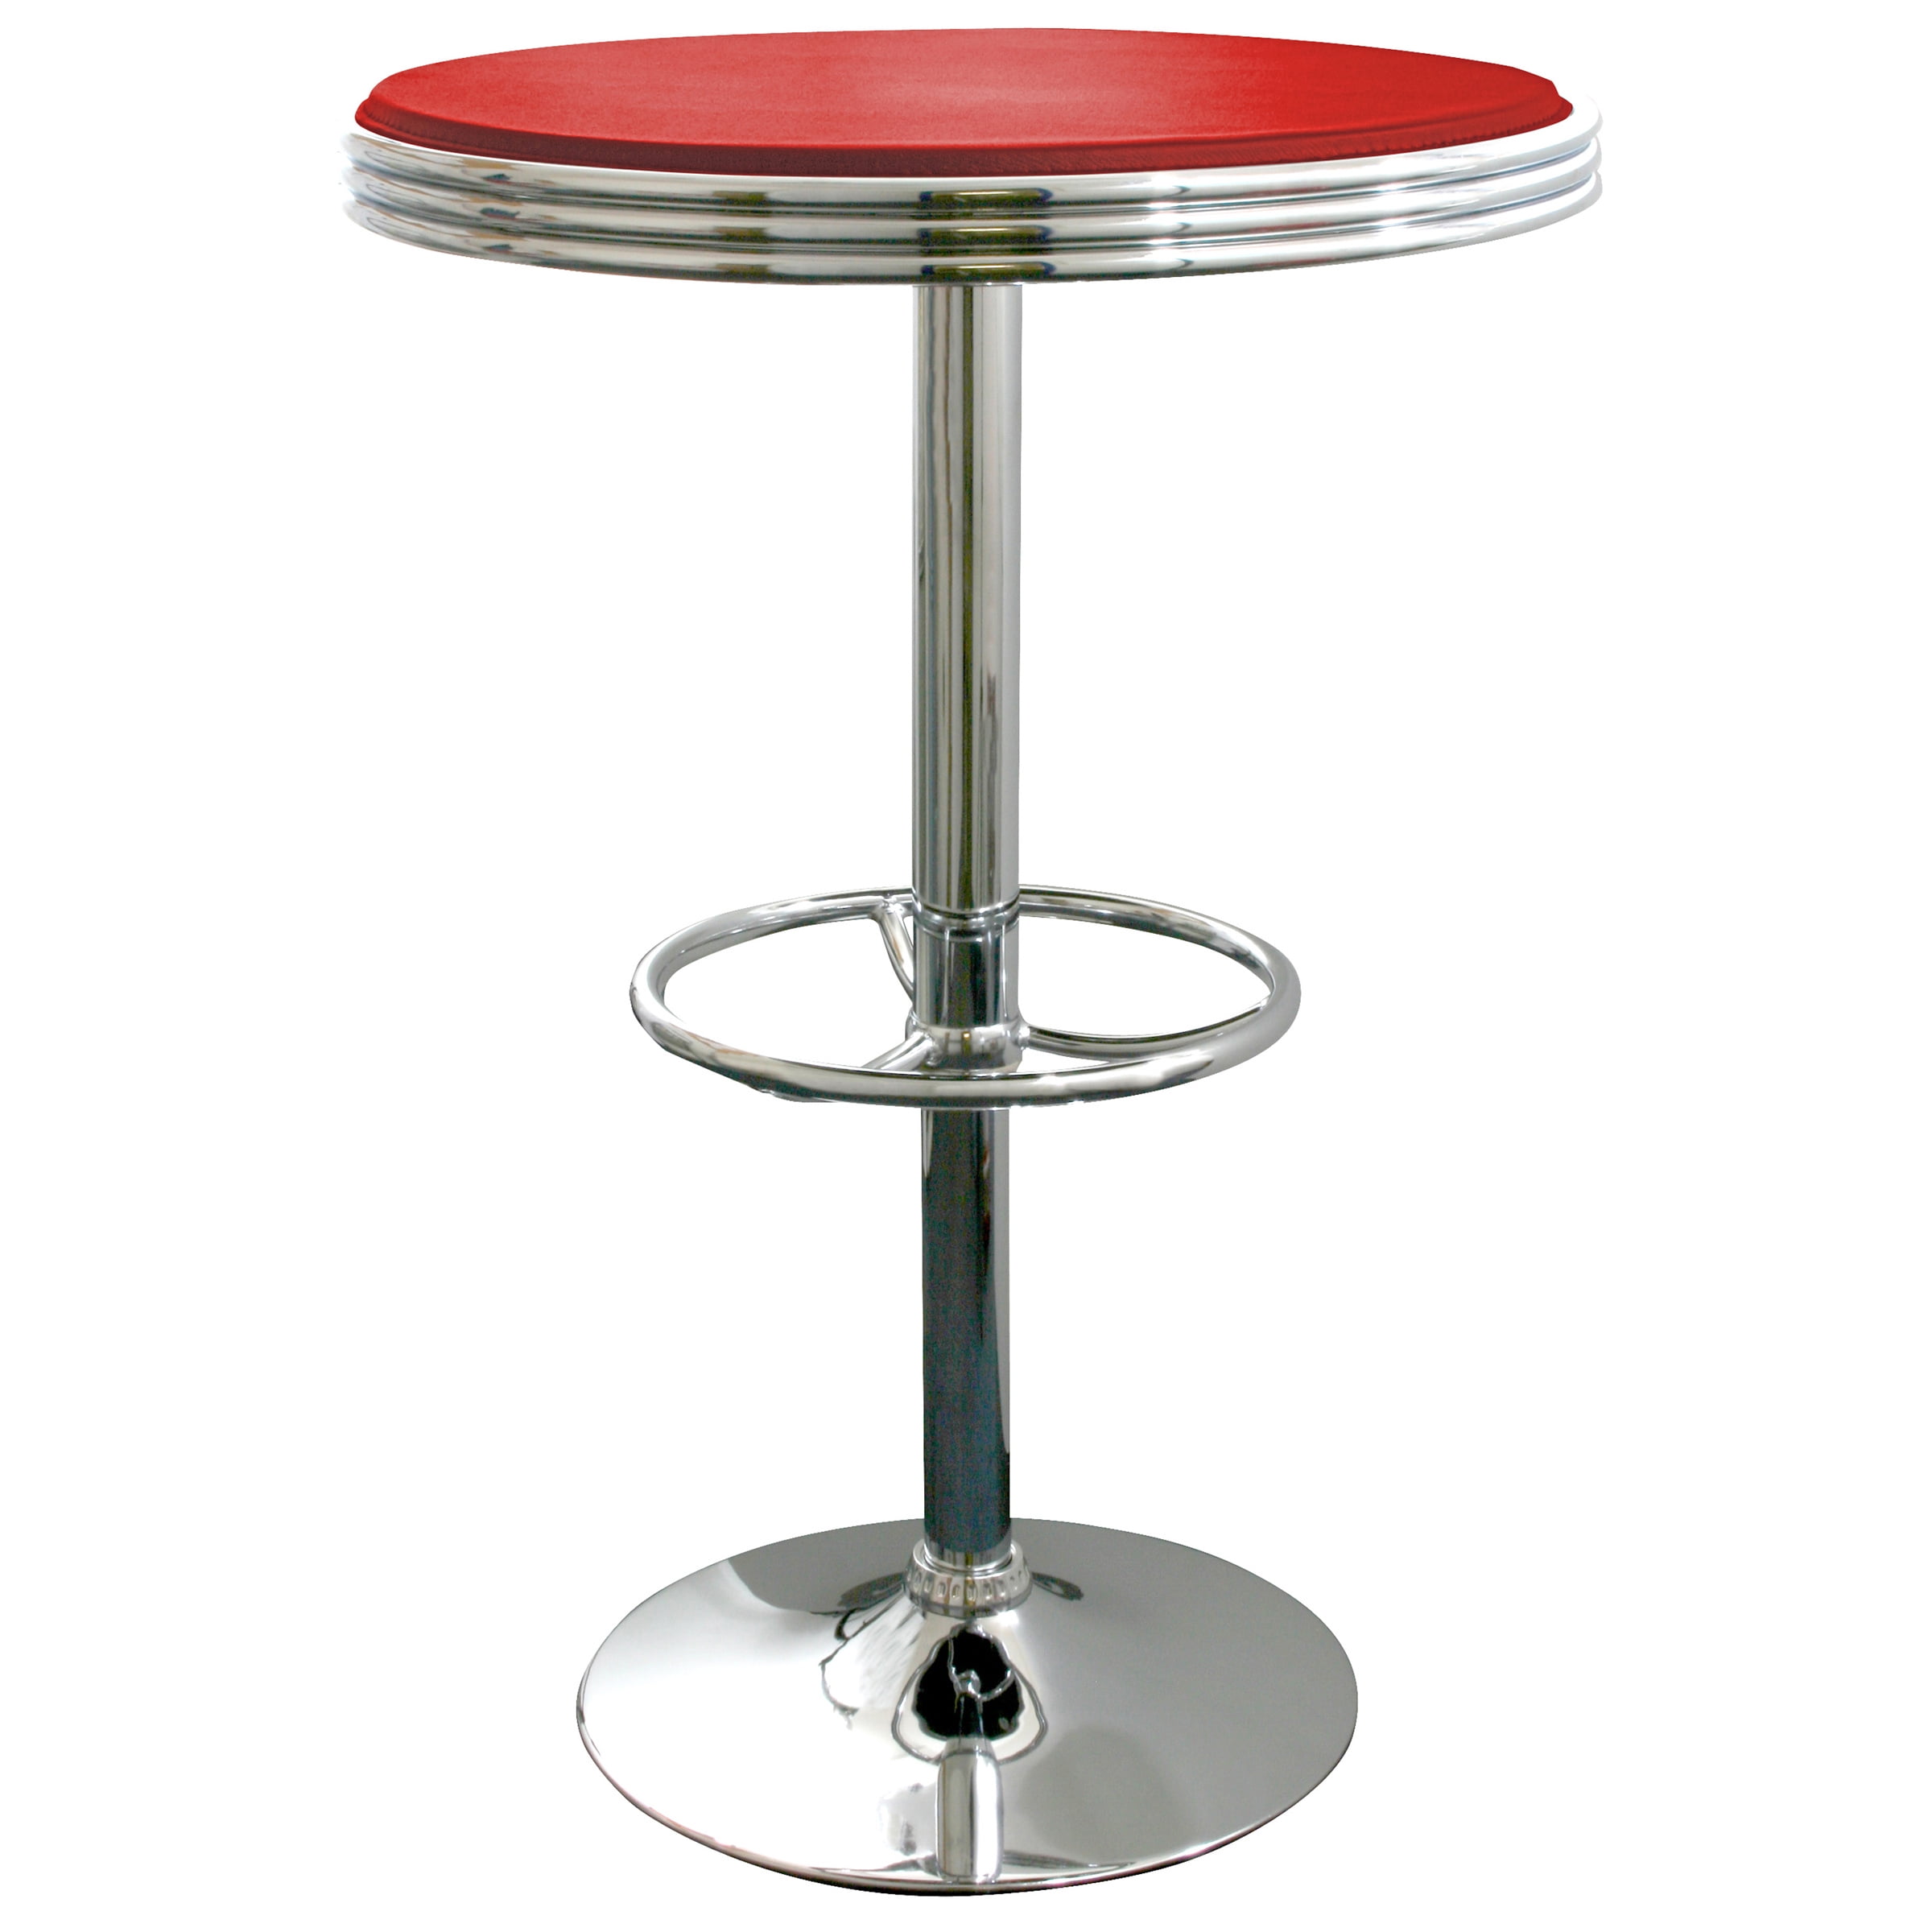 AmeriHome Soda Fountain Style Bar Table - Red